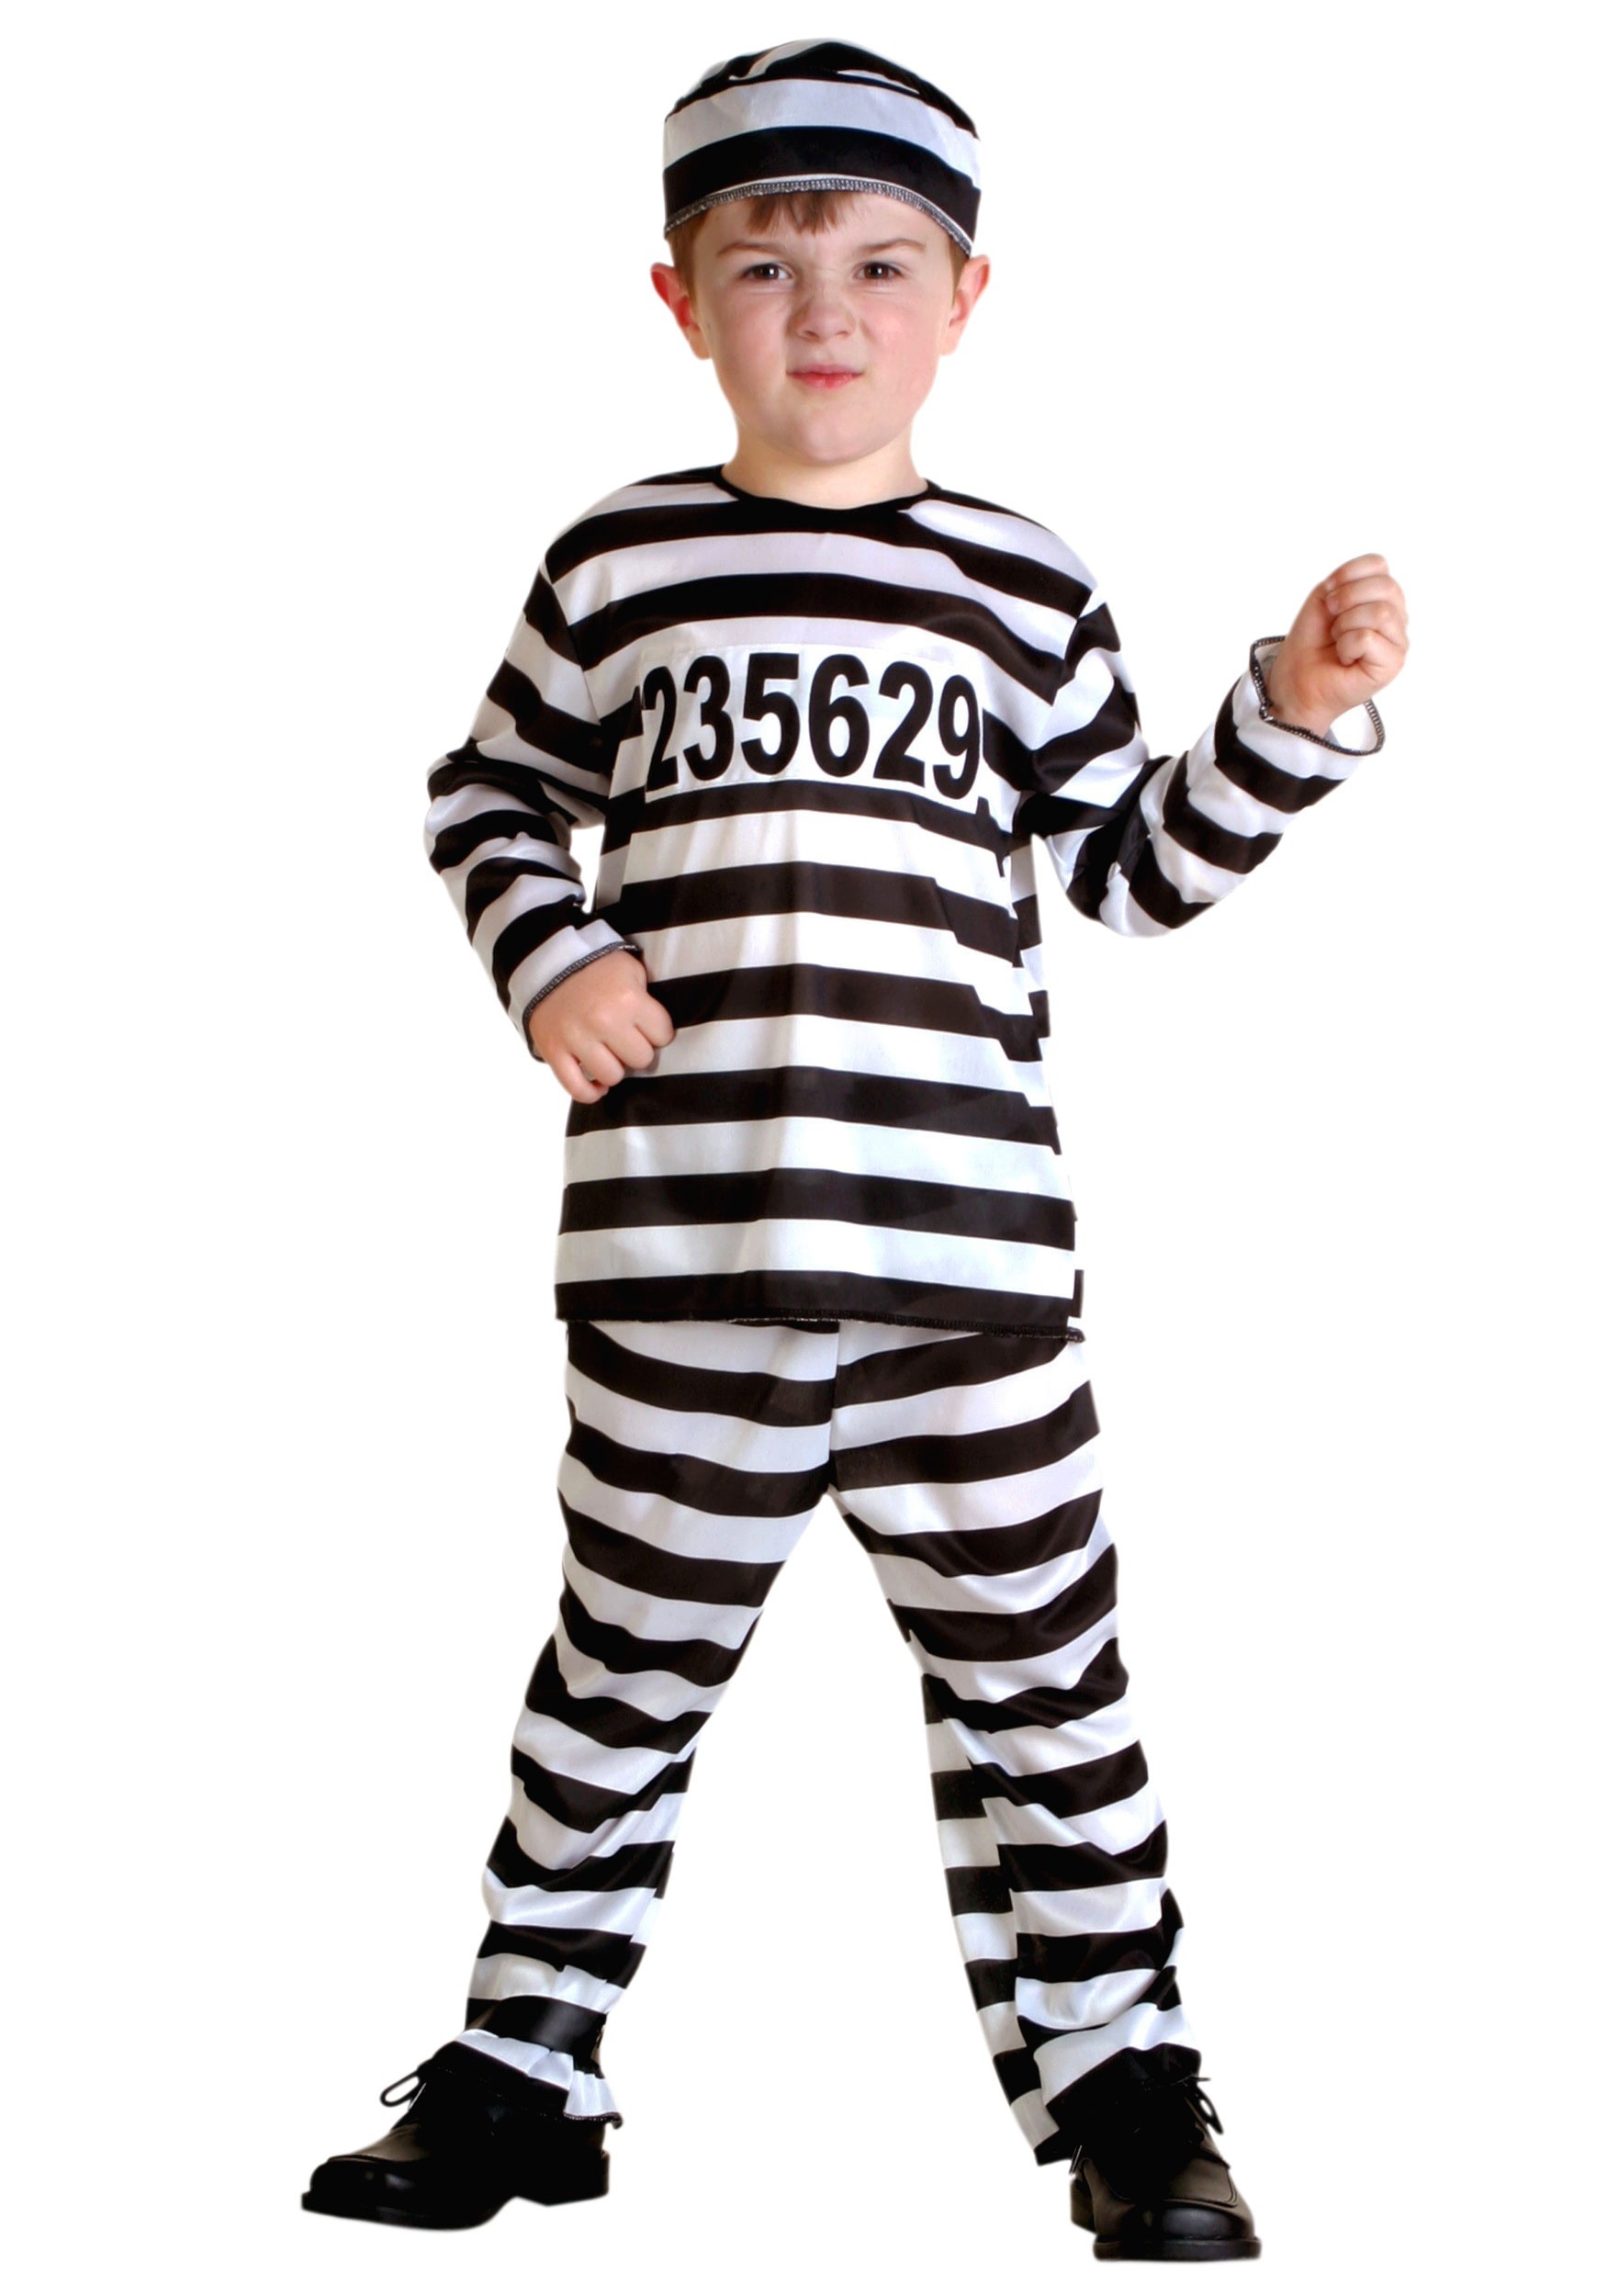 Photos - Fancy Dress Toddler FUN Costumes Striped Prisoner Costume for Toddlers | Jailbird Costume for 